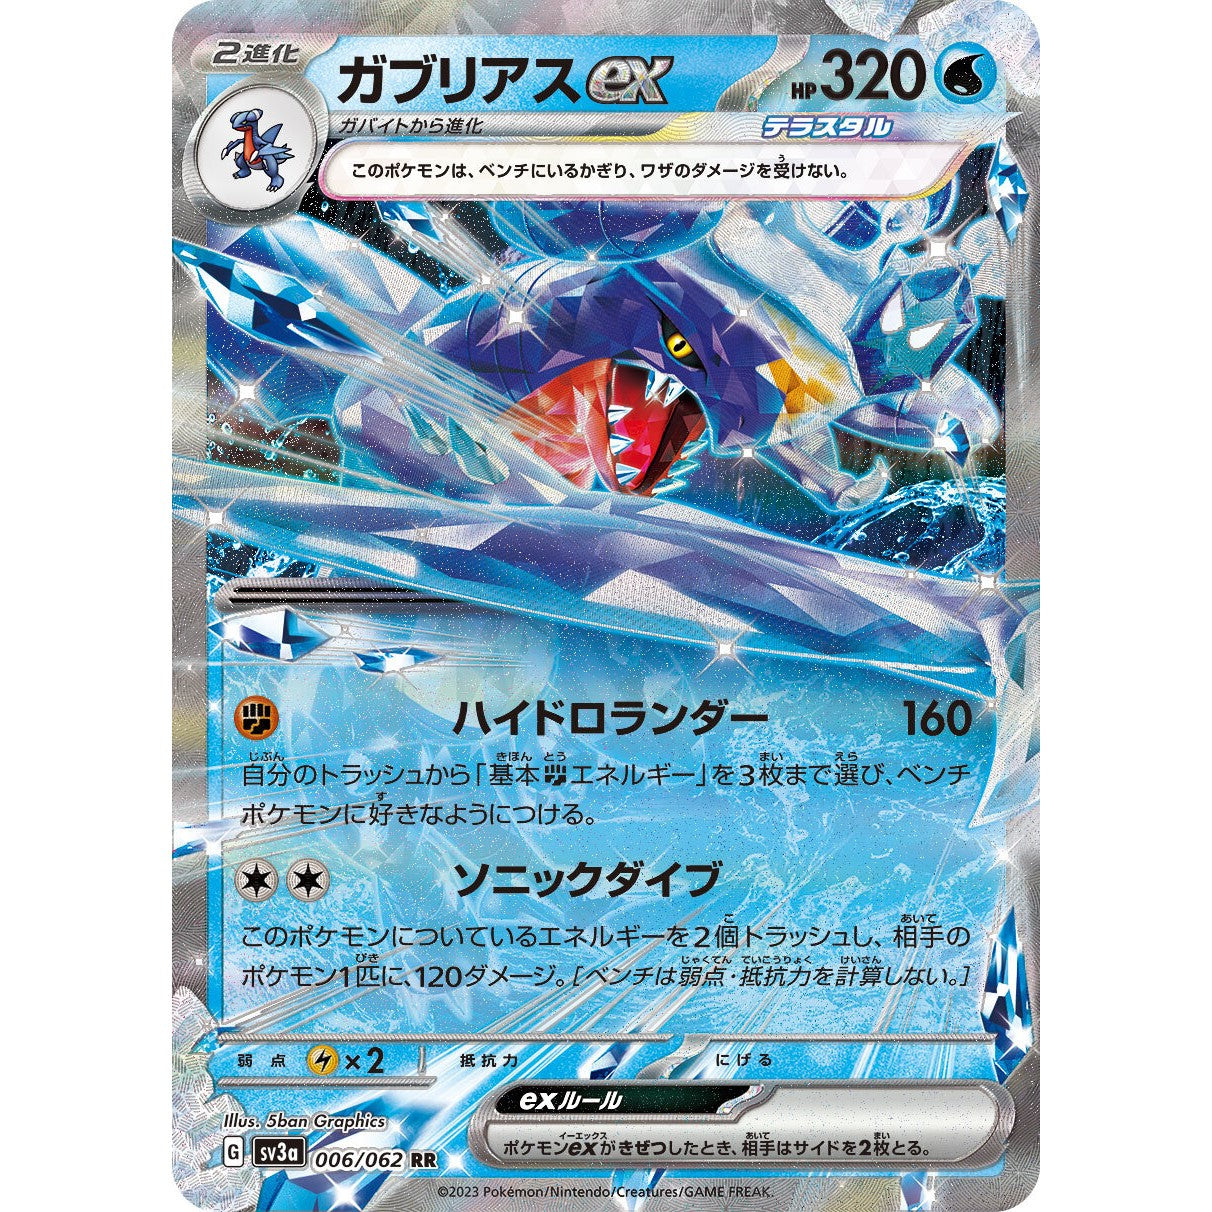 Pokemon Card Game Raging Surf Booster Box [sv3a]